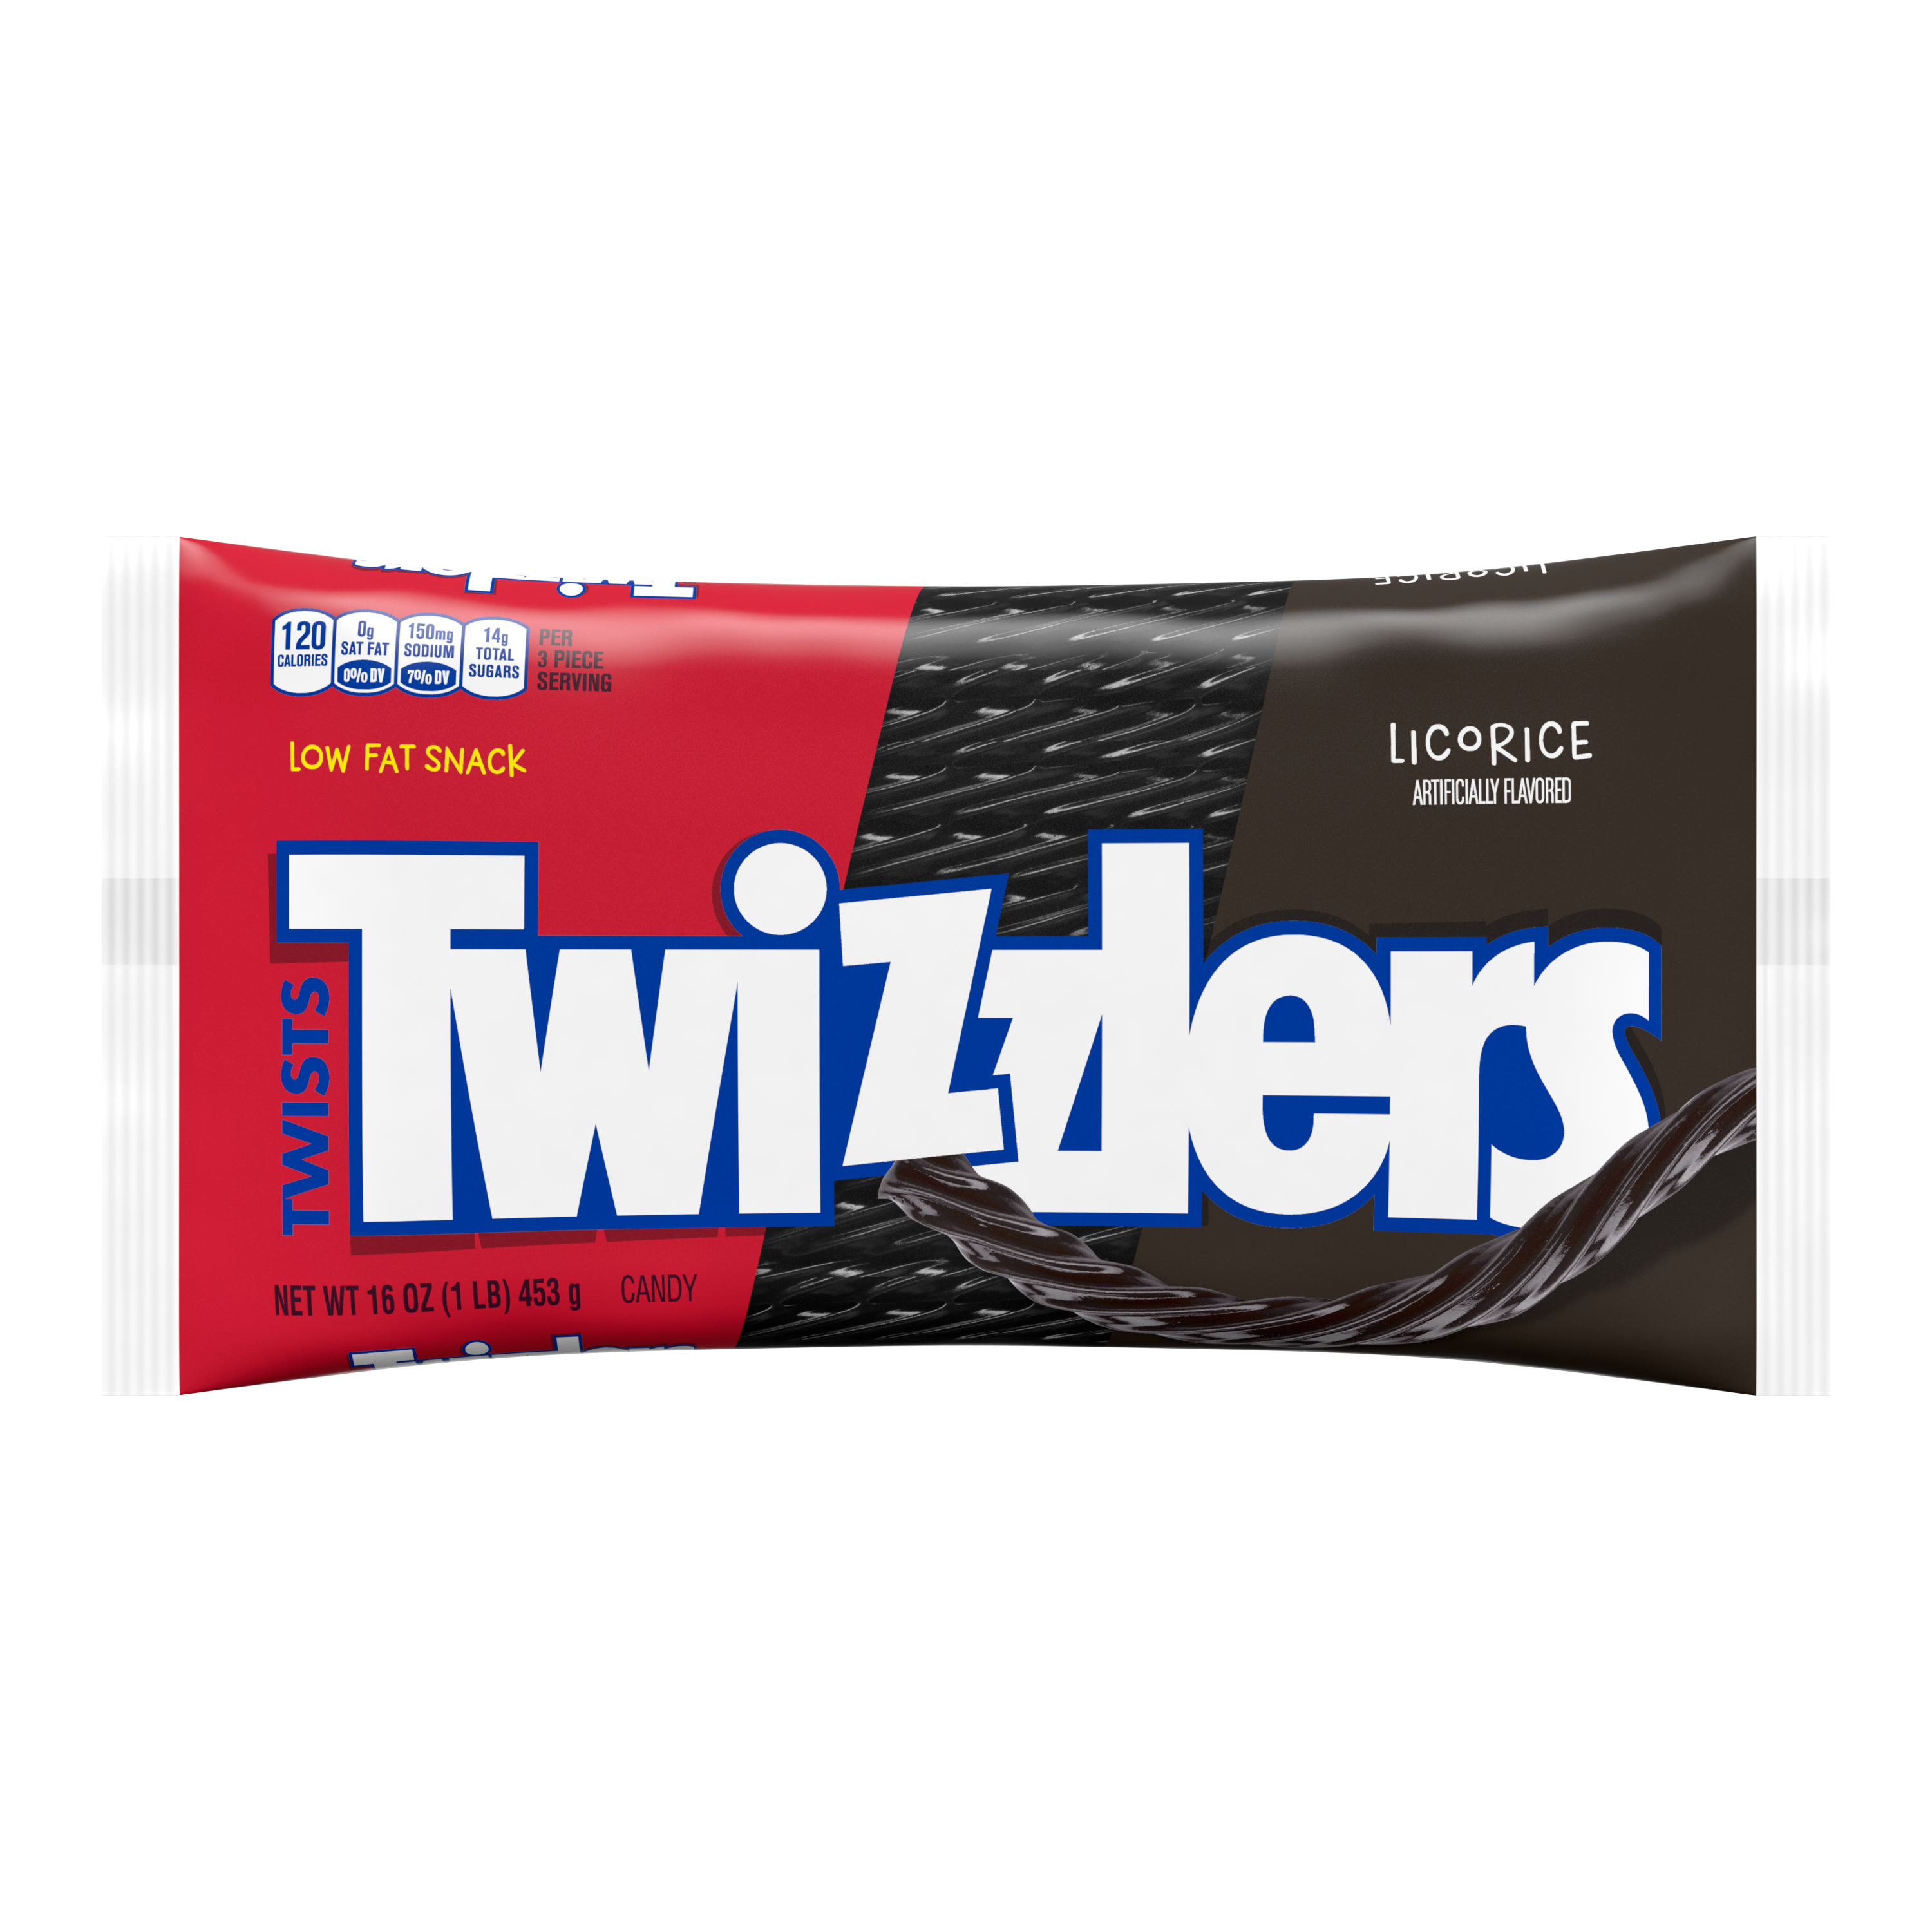 TWIZZLERS Twists Black Licorice Candy, 16 oz bag - Front of Package